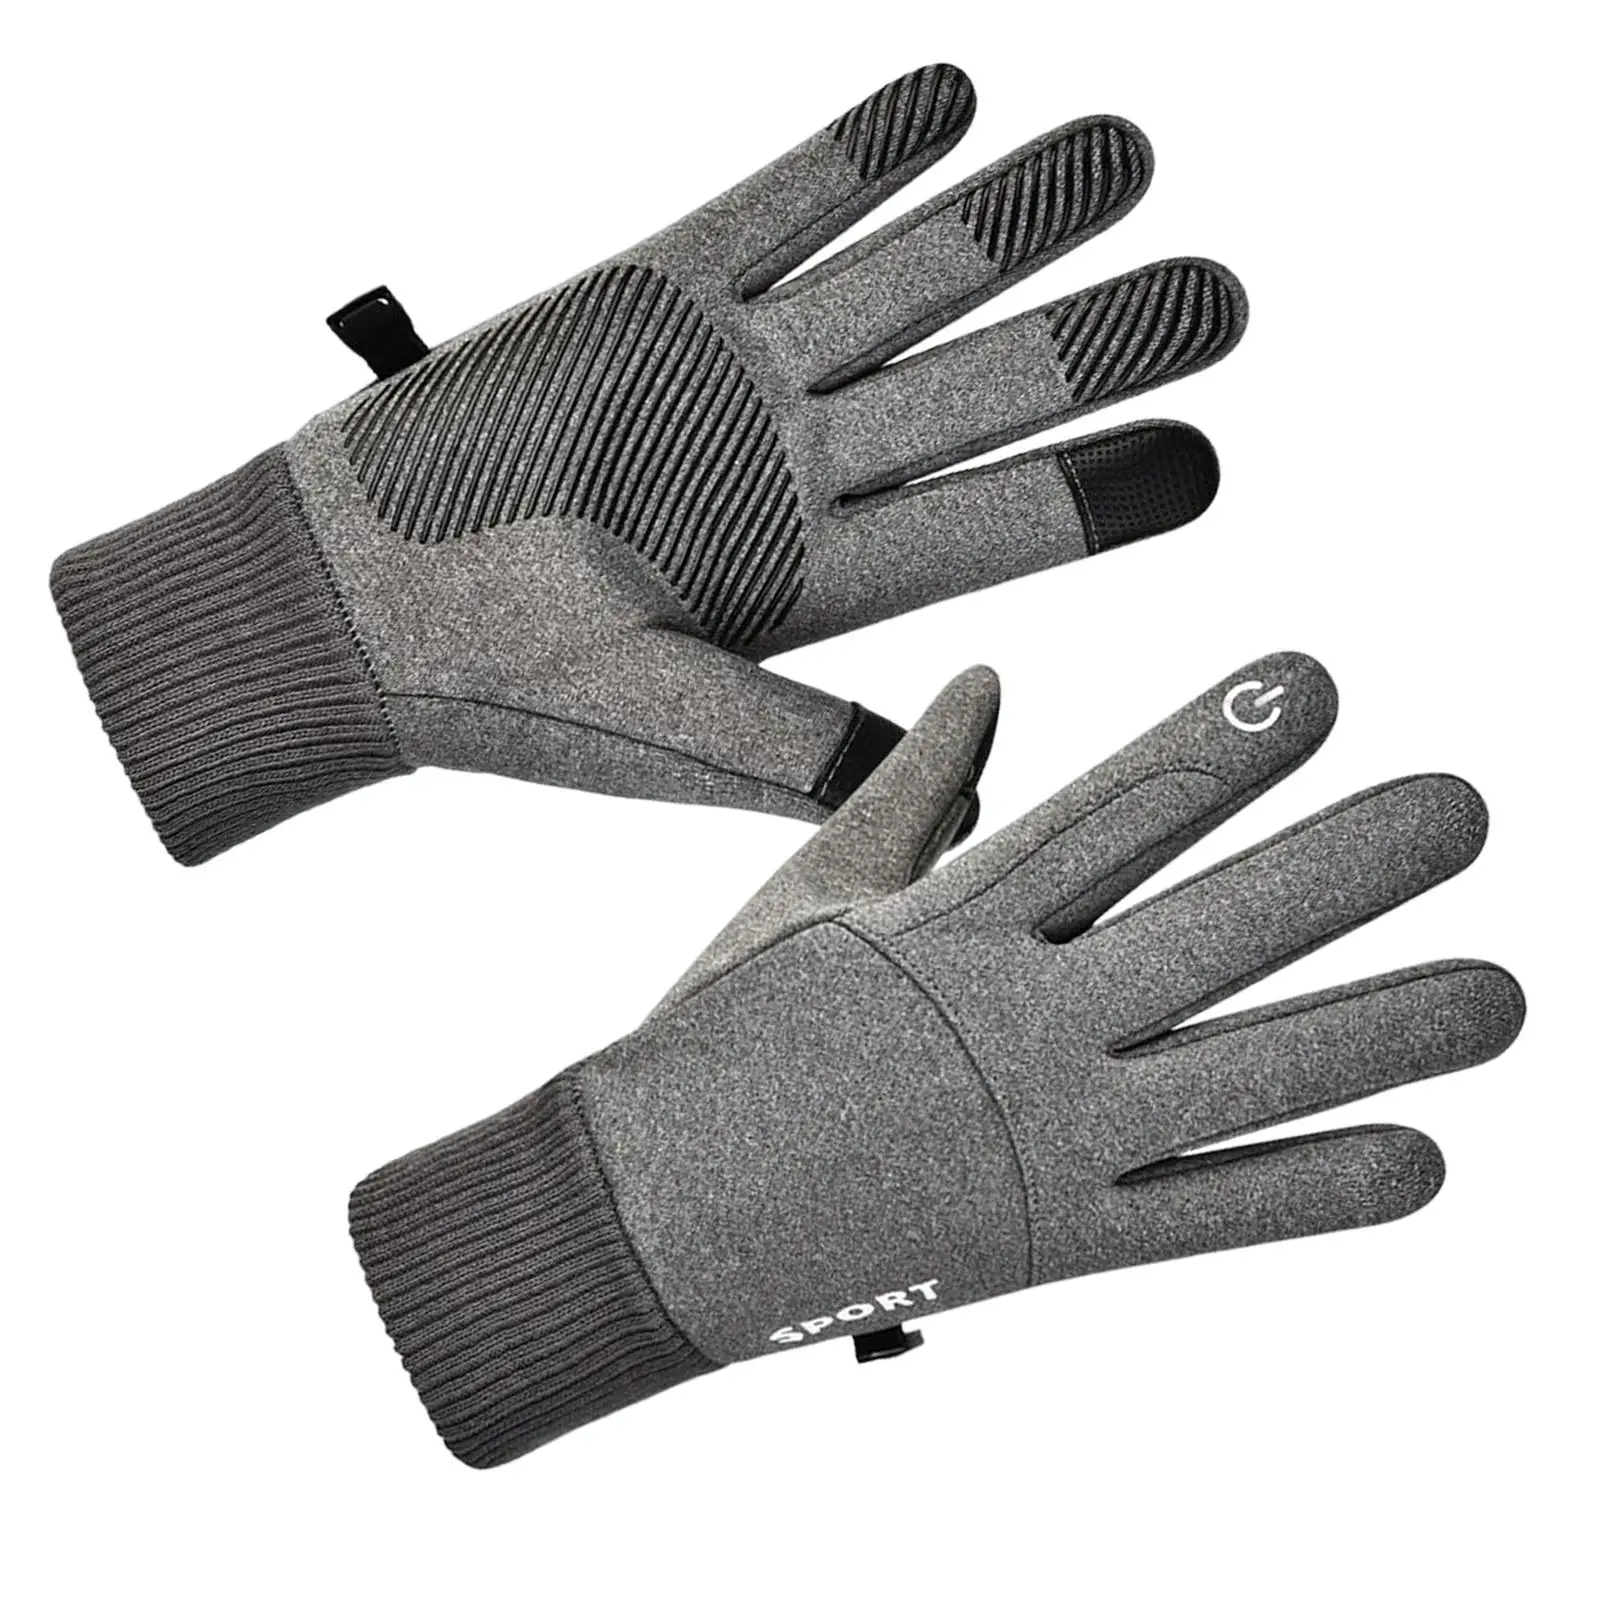 Cycling Gloves, Waterproof Durable Non Slip and Touch Screen Fashion Thermal